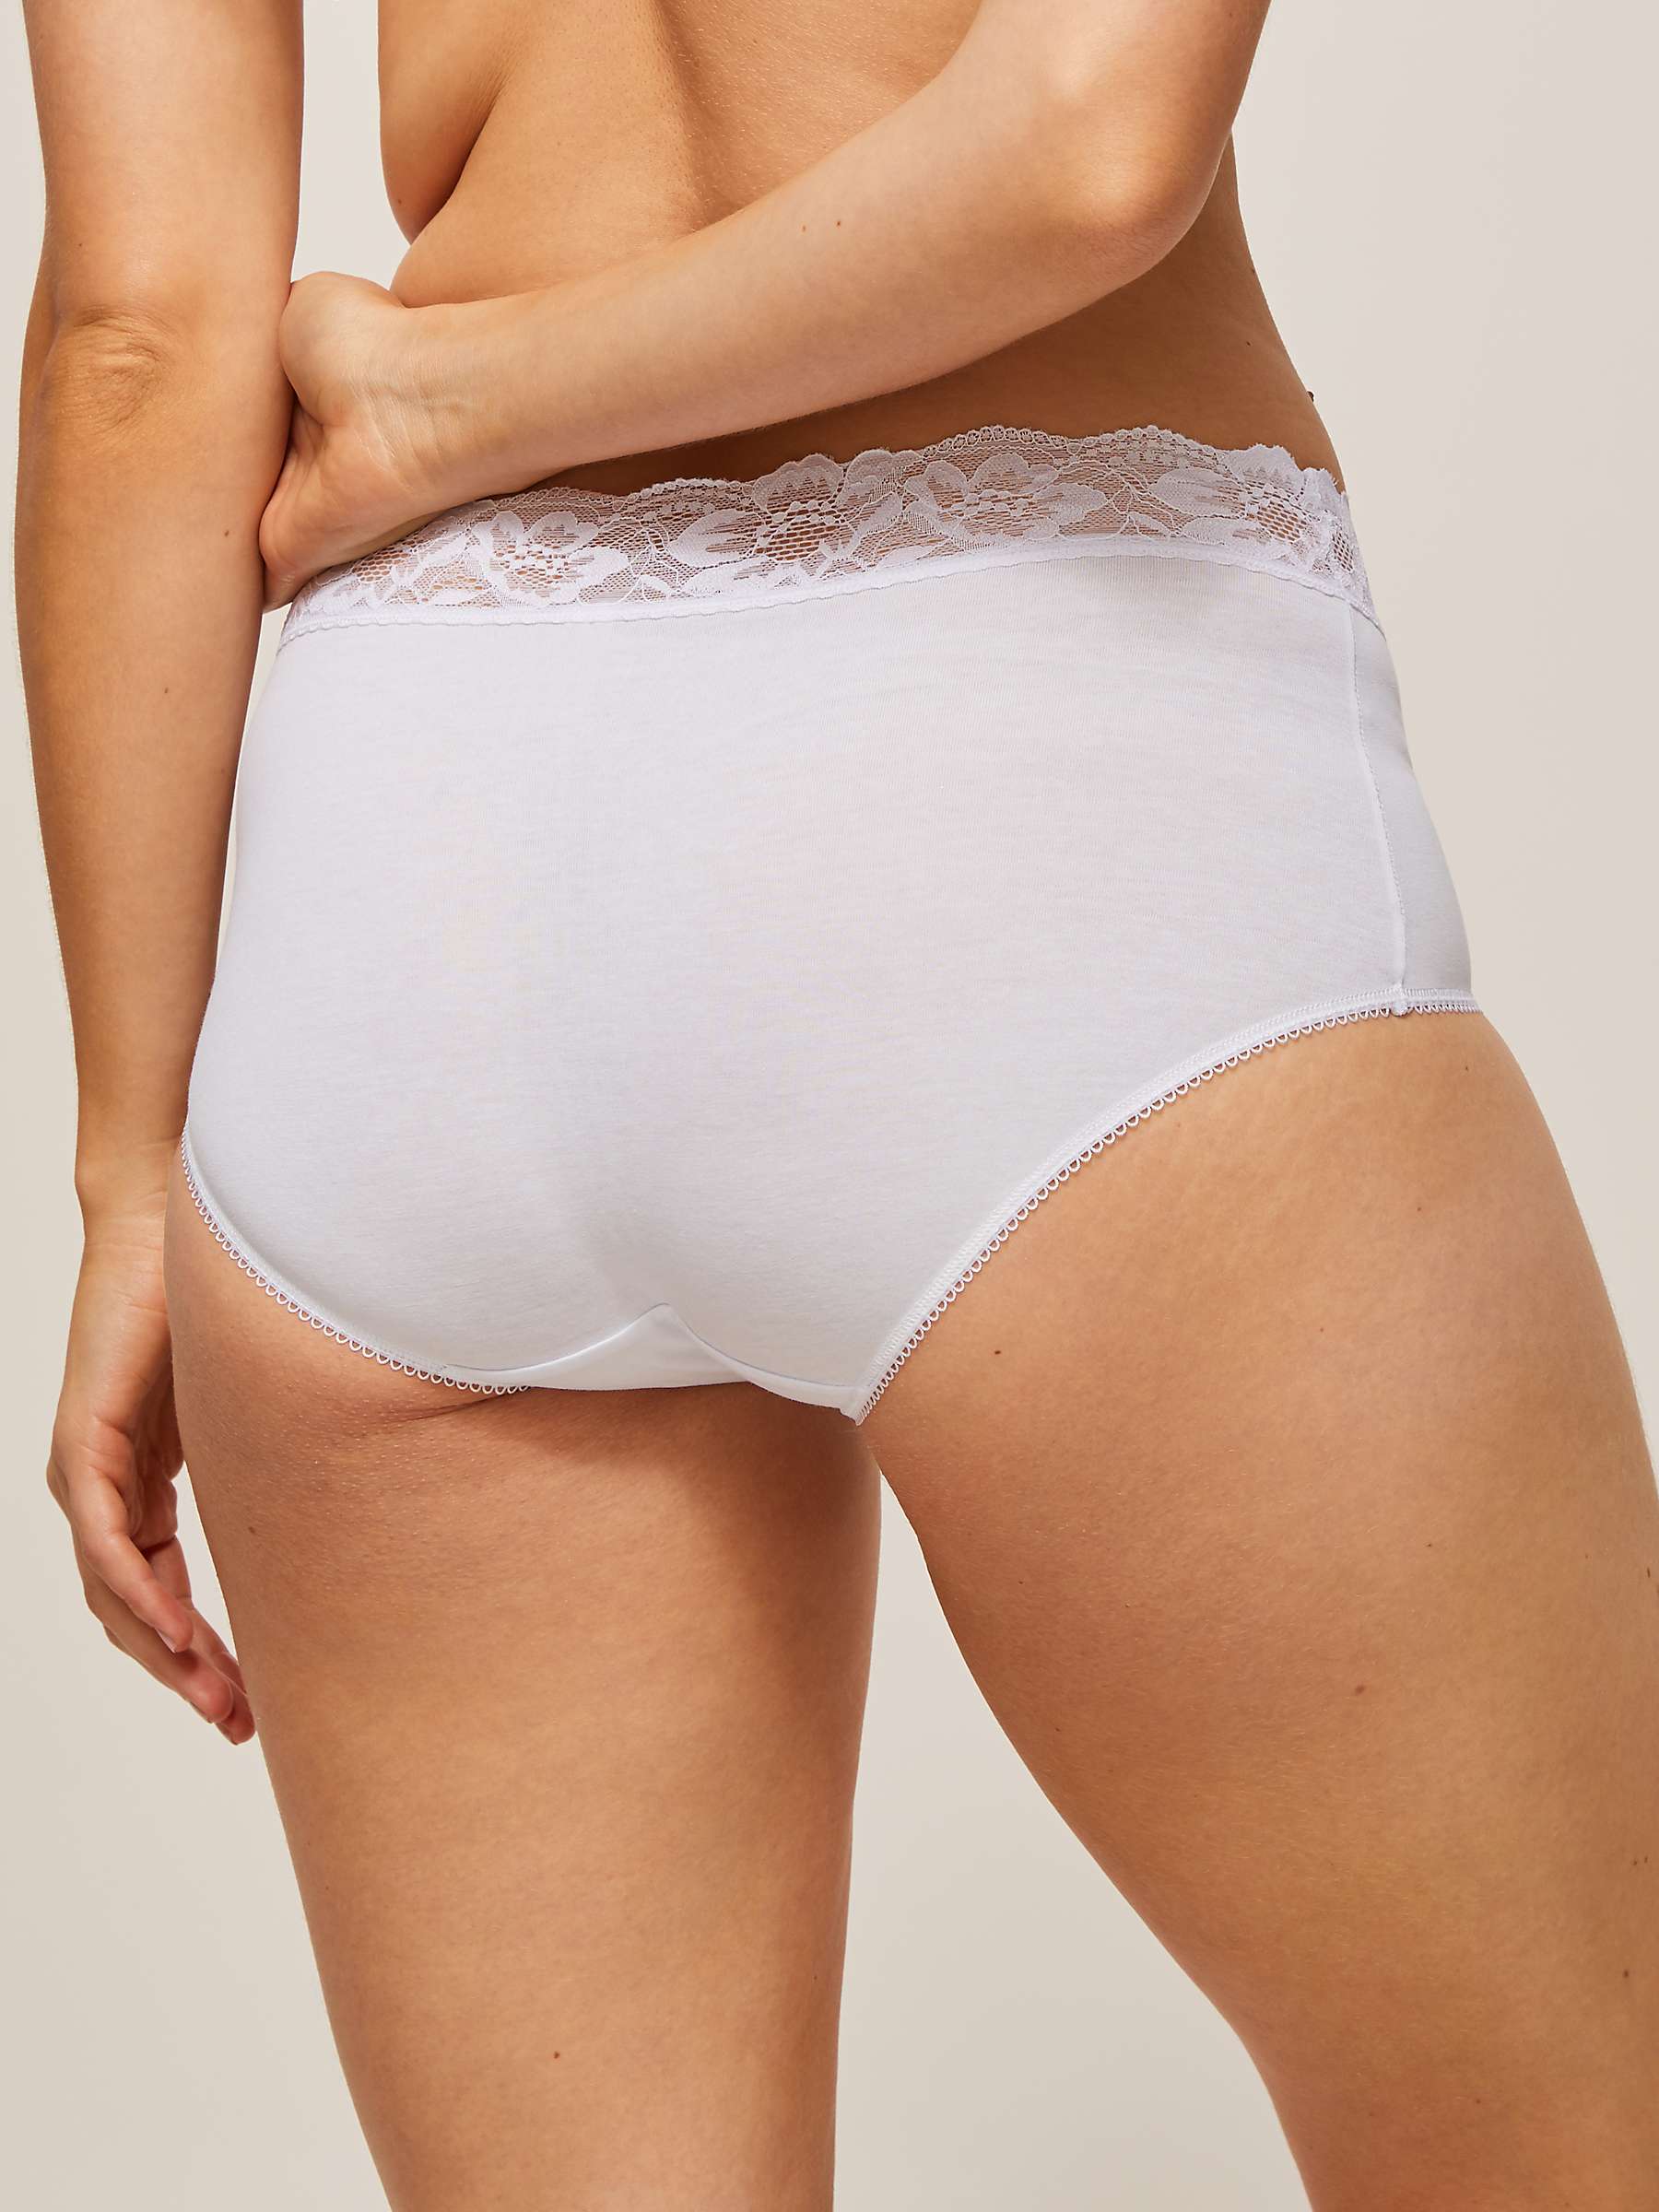 Buy John Lewis ANYDAY Lace Trim Full Briefs, Pack of 3 Online at johnlewis.com